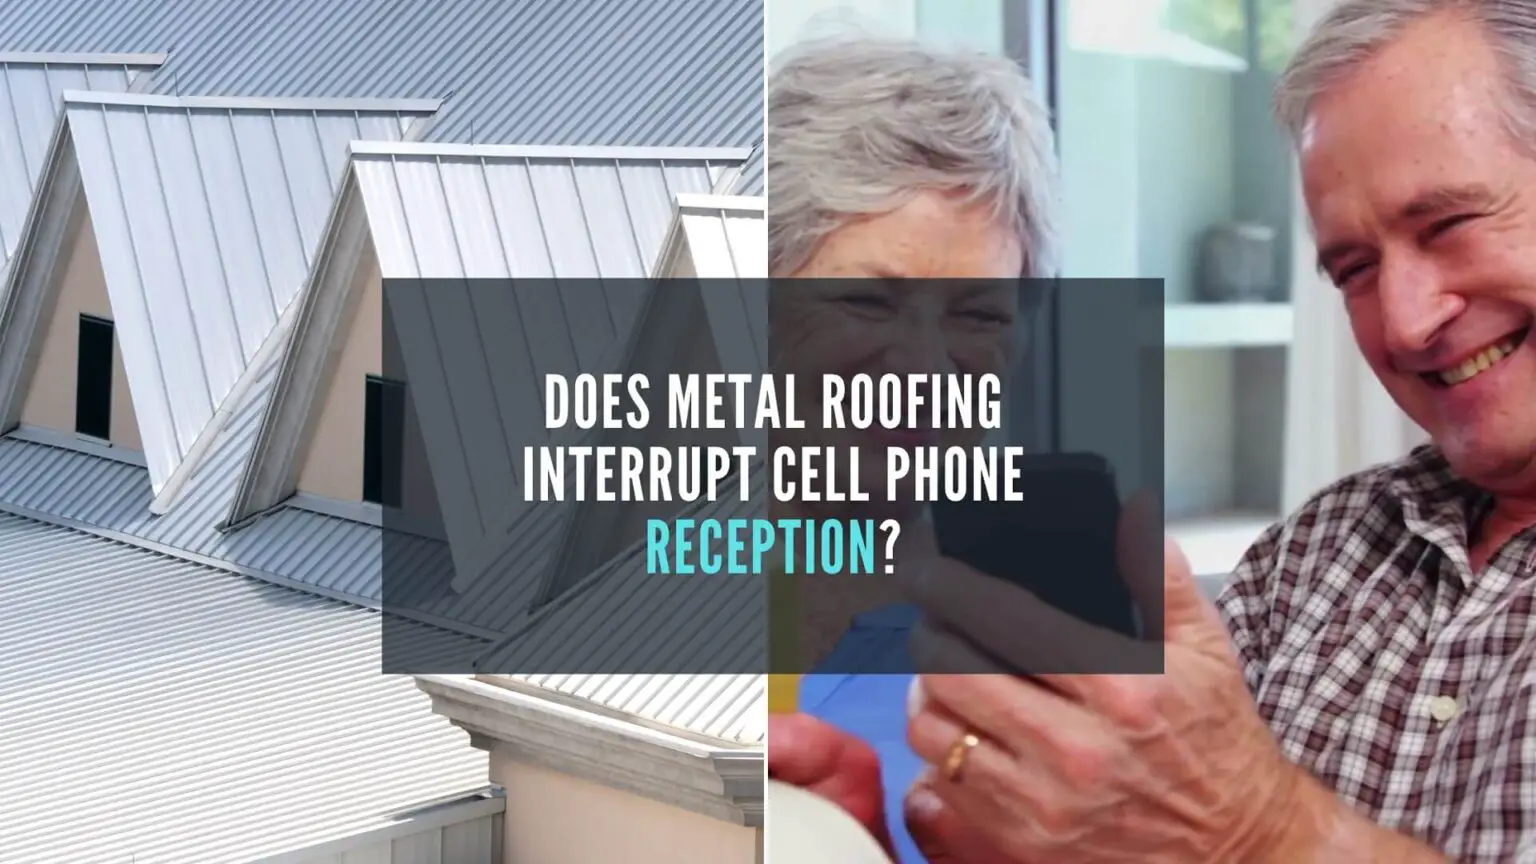 Does Metal Roofing Interrupt Cell Phone Reception?